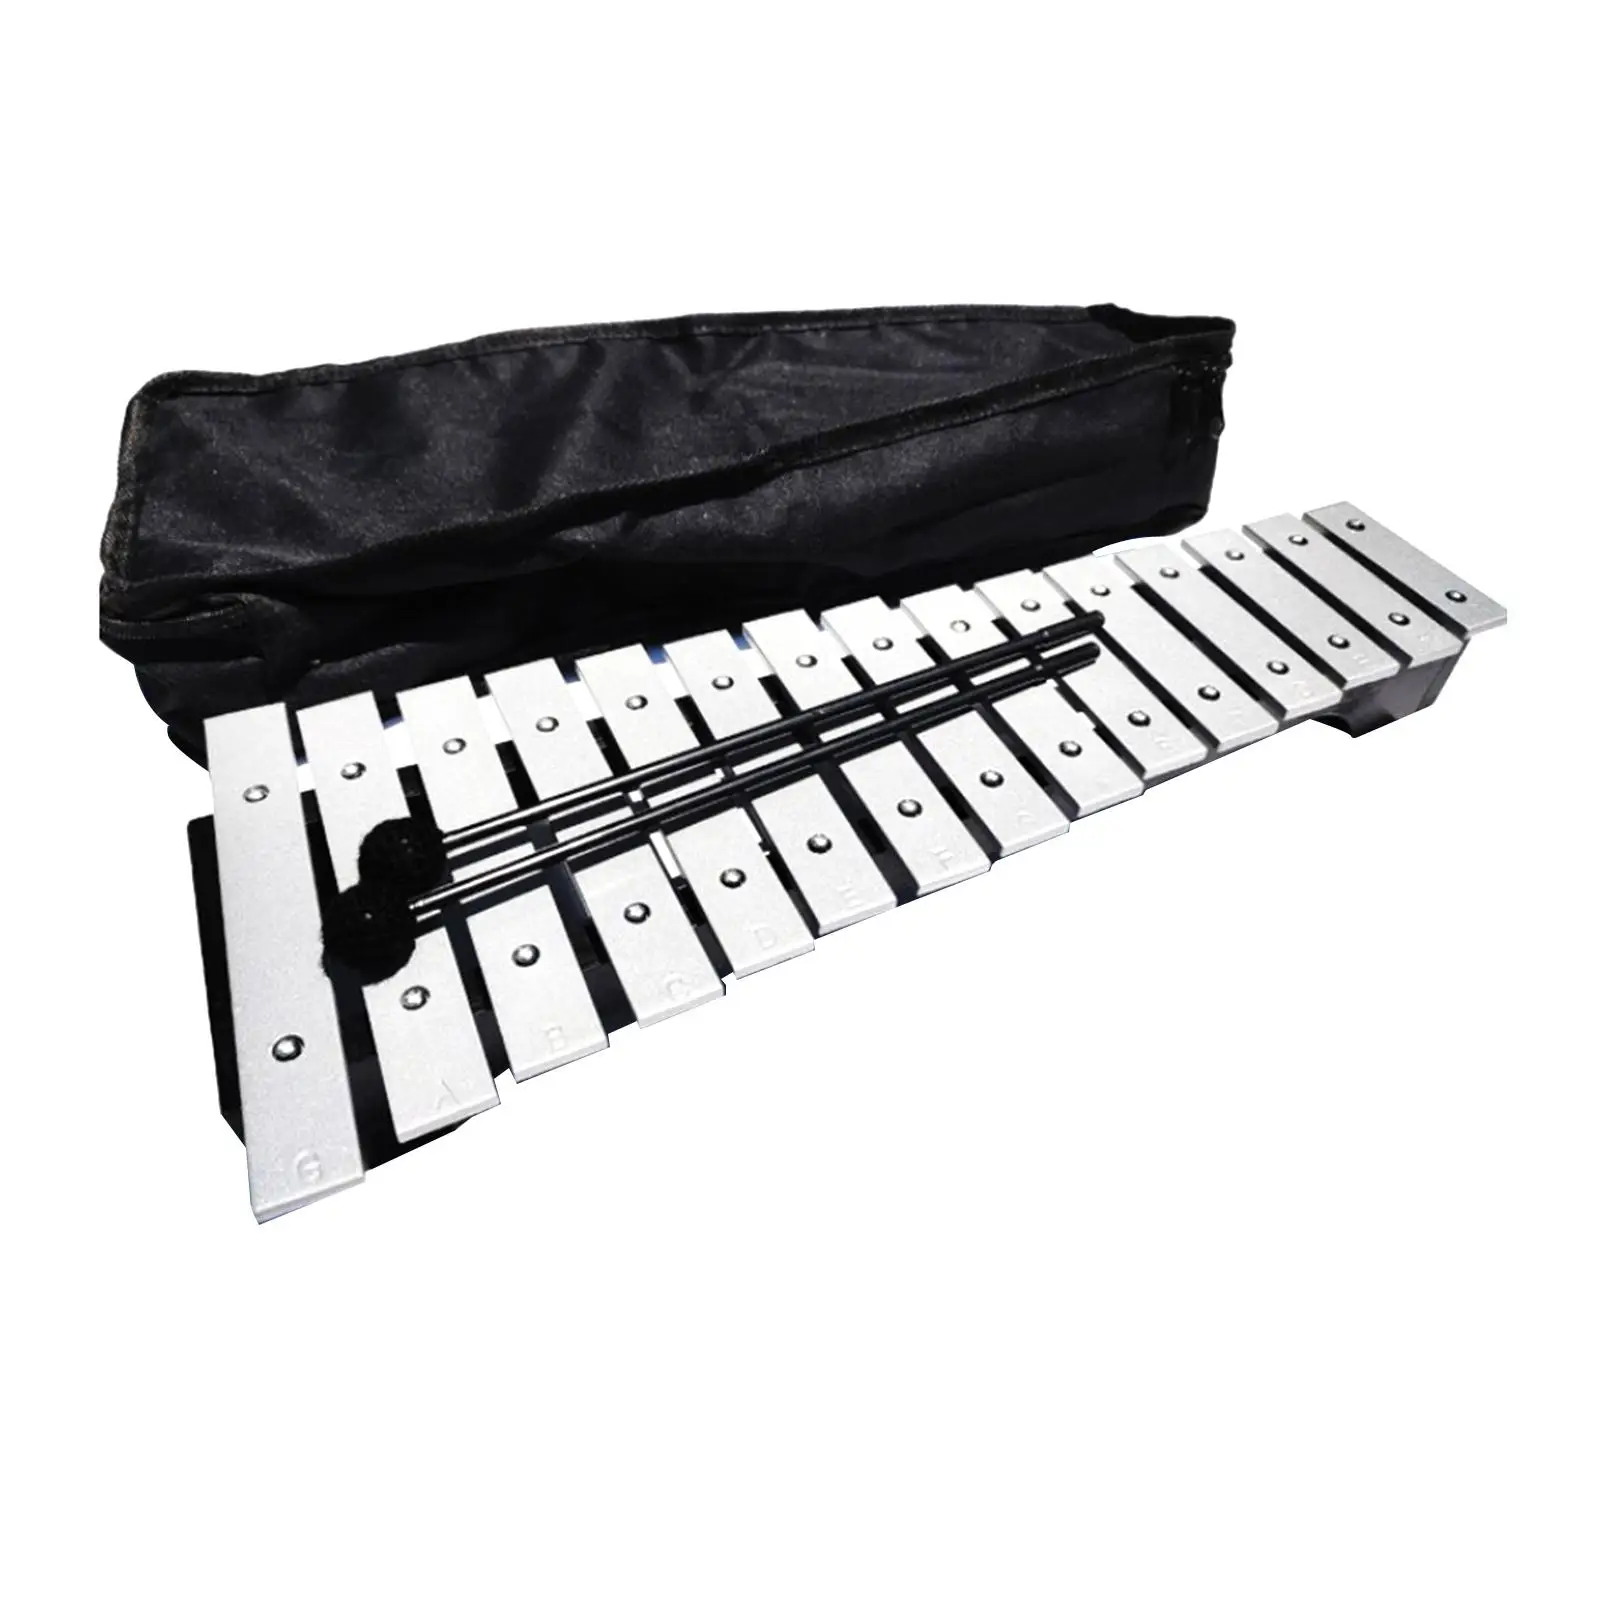 Professional 15 Note Glockenspiel Portable Percussion Xylophone Music Instrument Toy Percussion for Kids and Adult Beginner